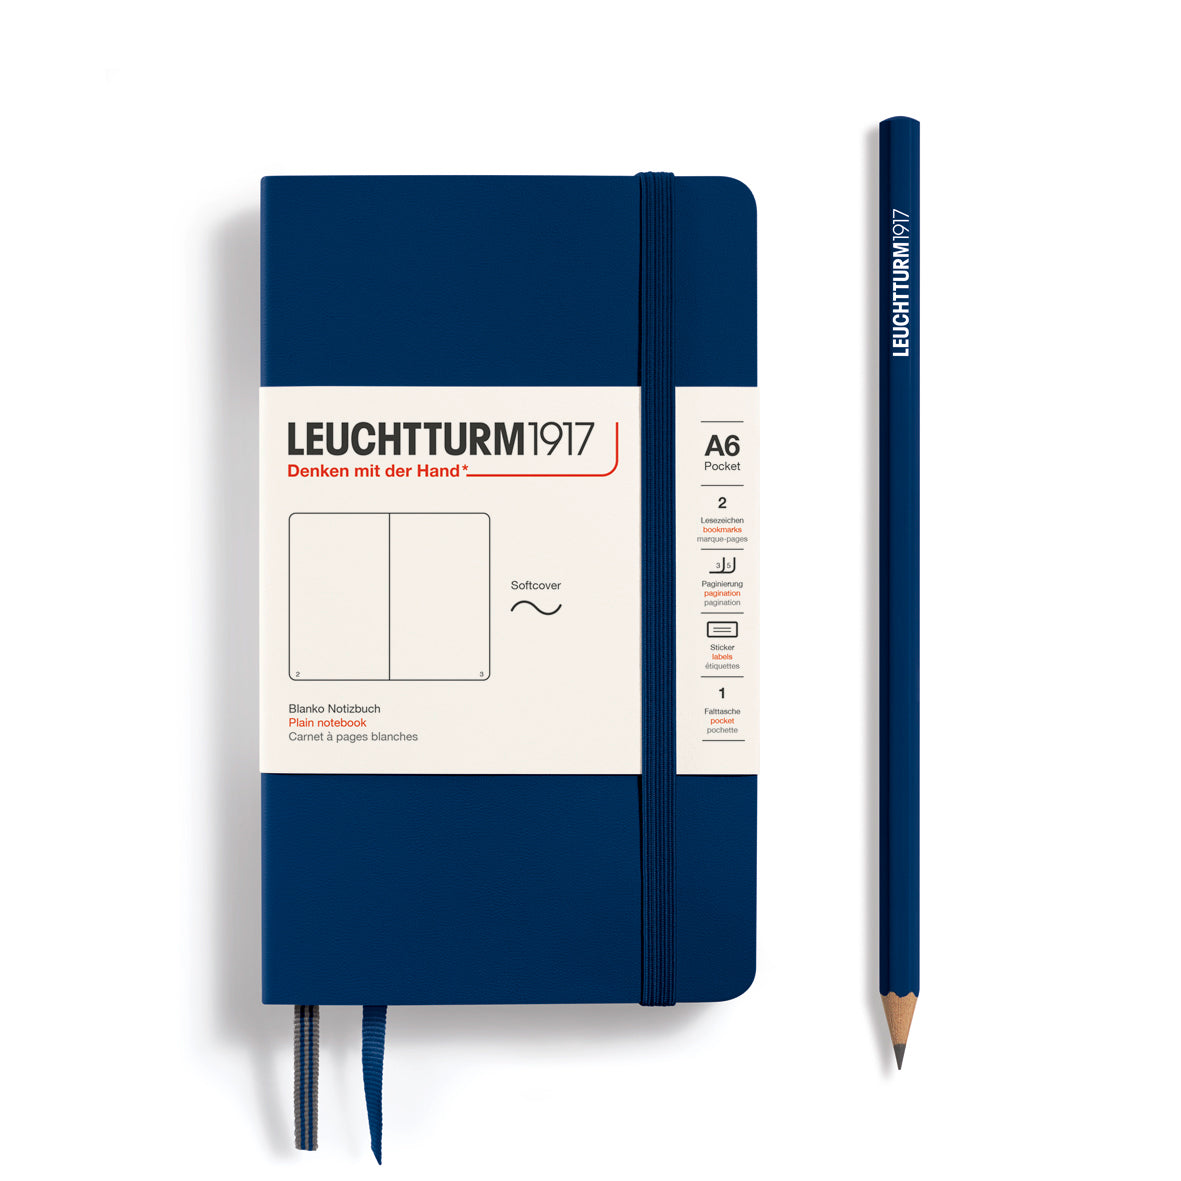 LEUCHTTURM1917 Notebook A6 Pocket Softcover in navy blue and blank inside at Penny Black